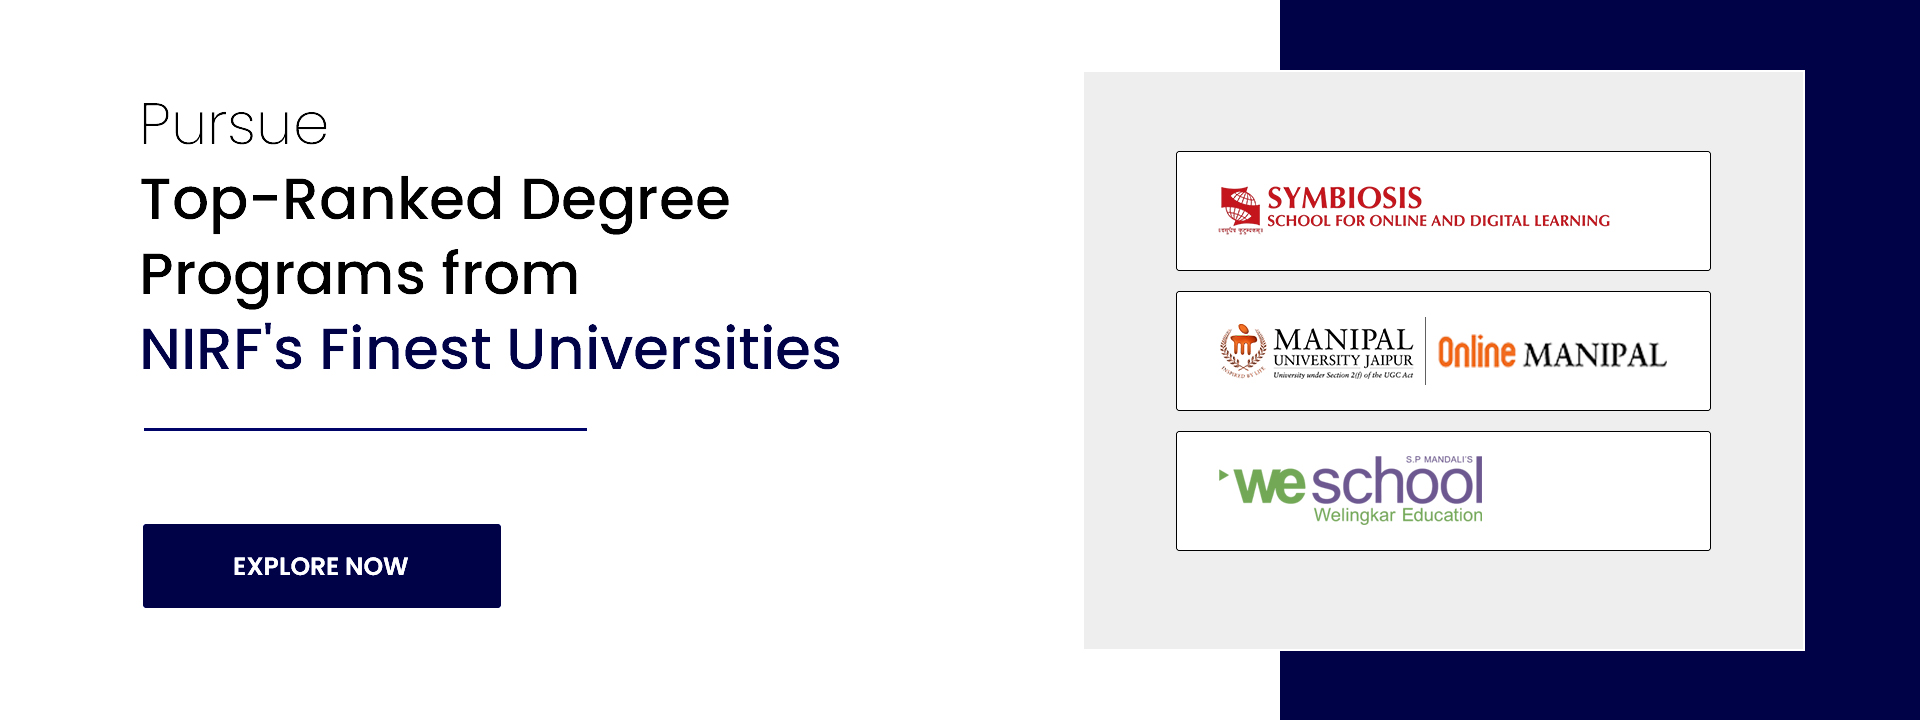 Pursue Top-Ranked Degree Programs from NIRF's Finest Universities (1)